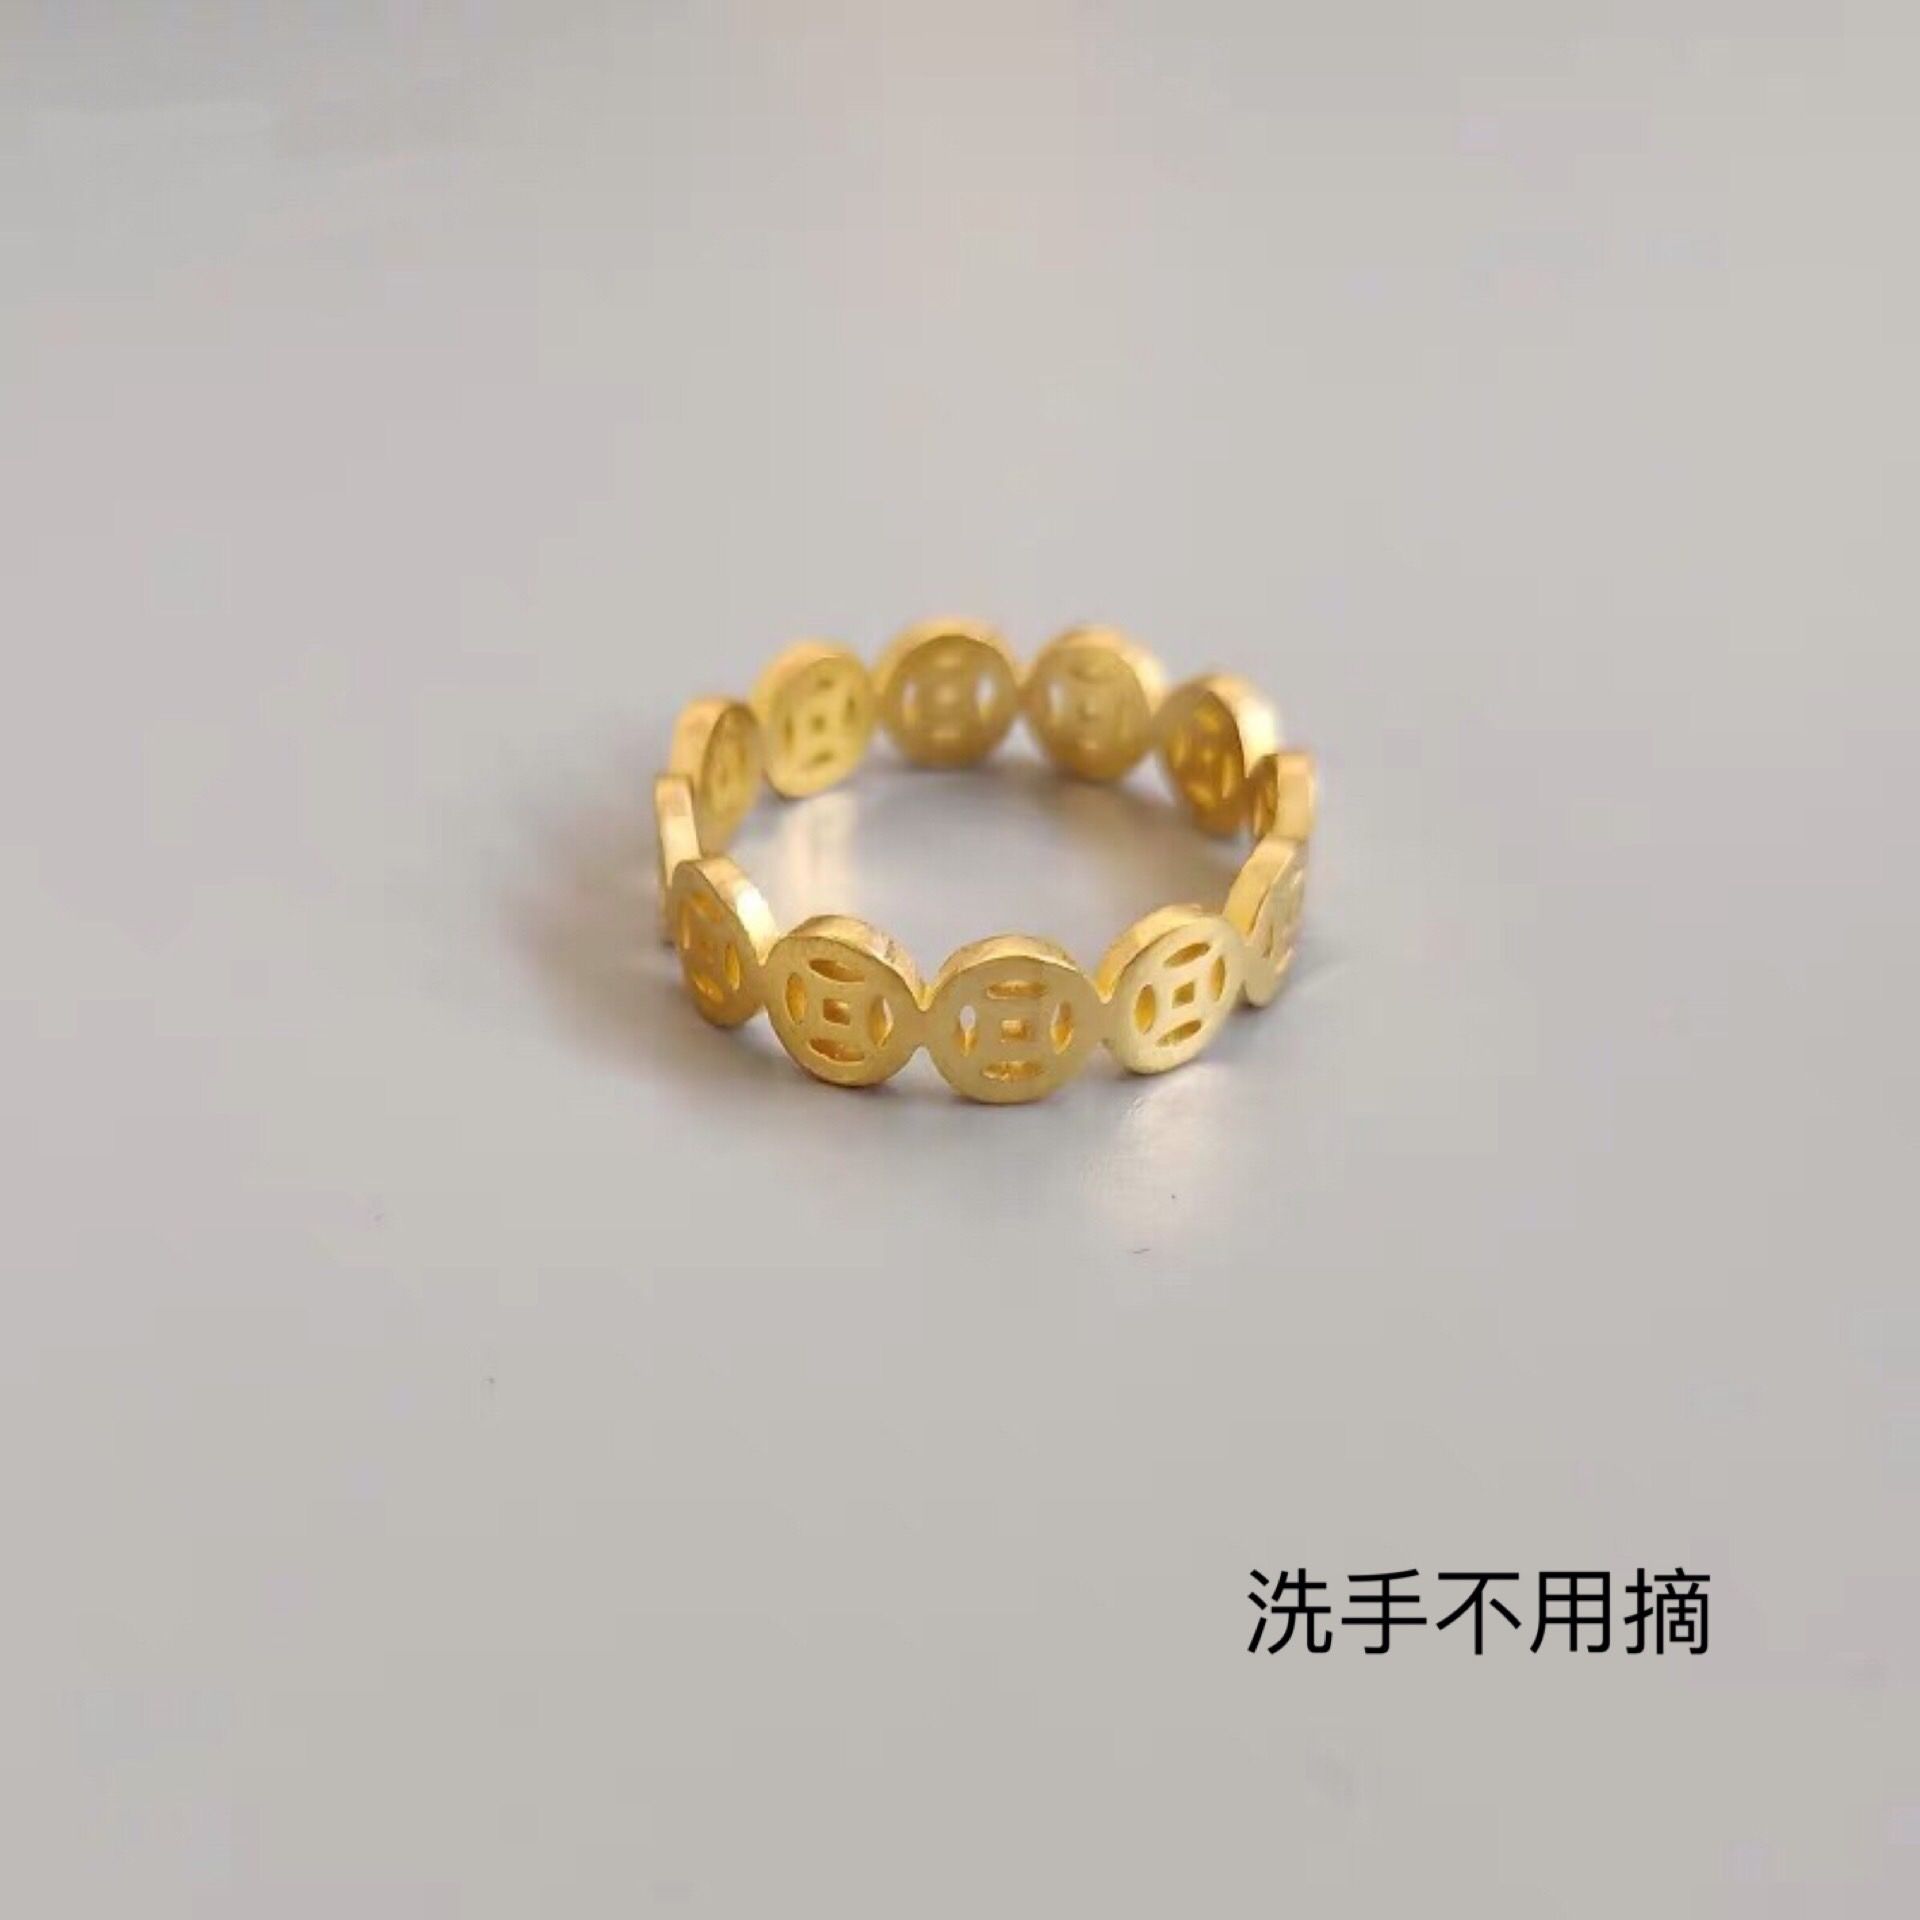 [no fading, no allergy] genuine titanium steel Zhaocai coin, gold coin, hollow gold wrapped good luck ring, index finger ring